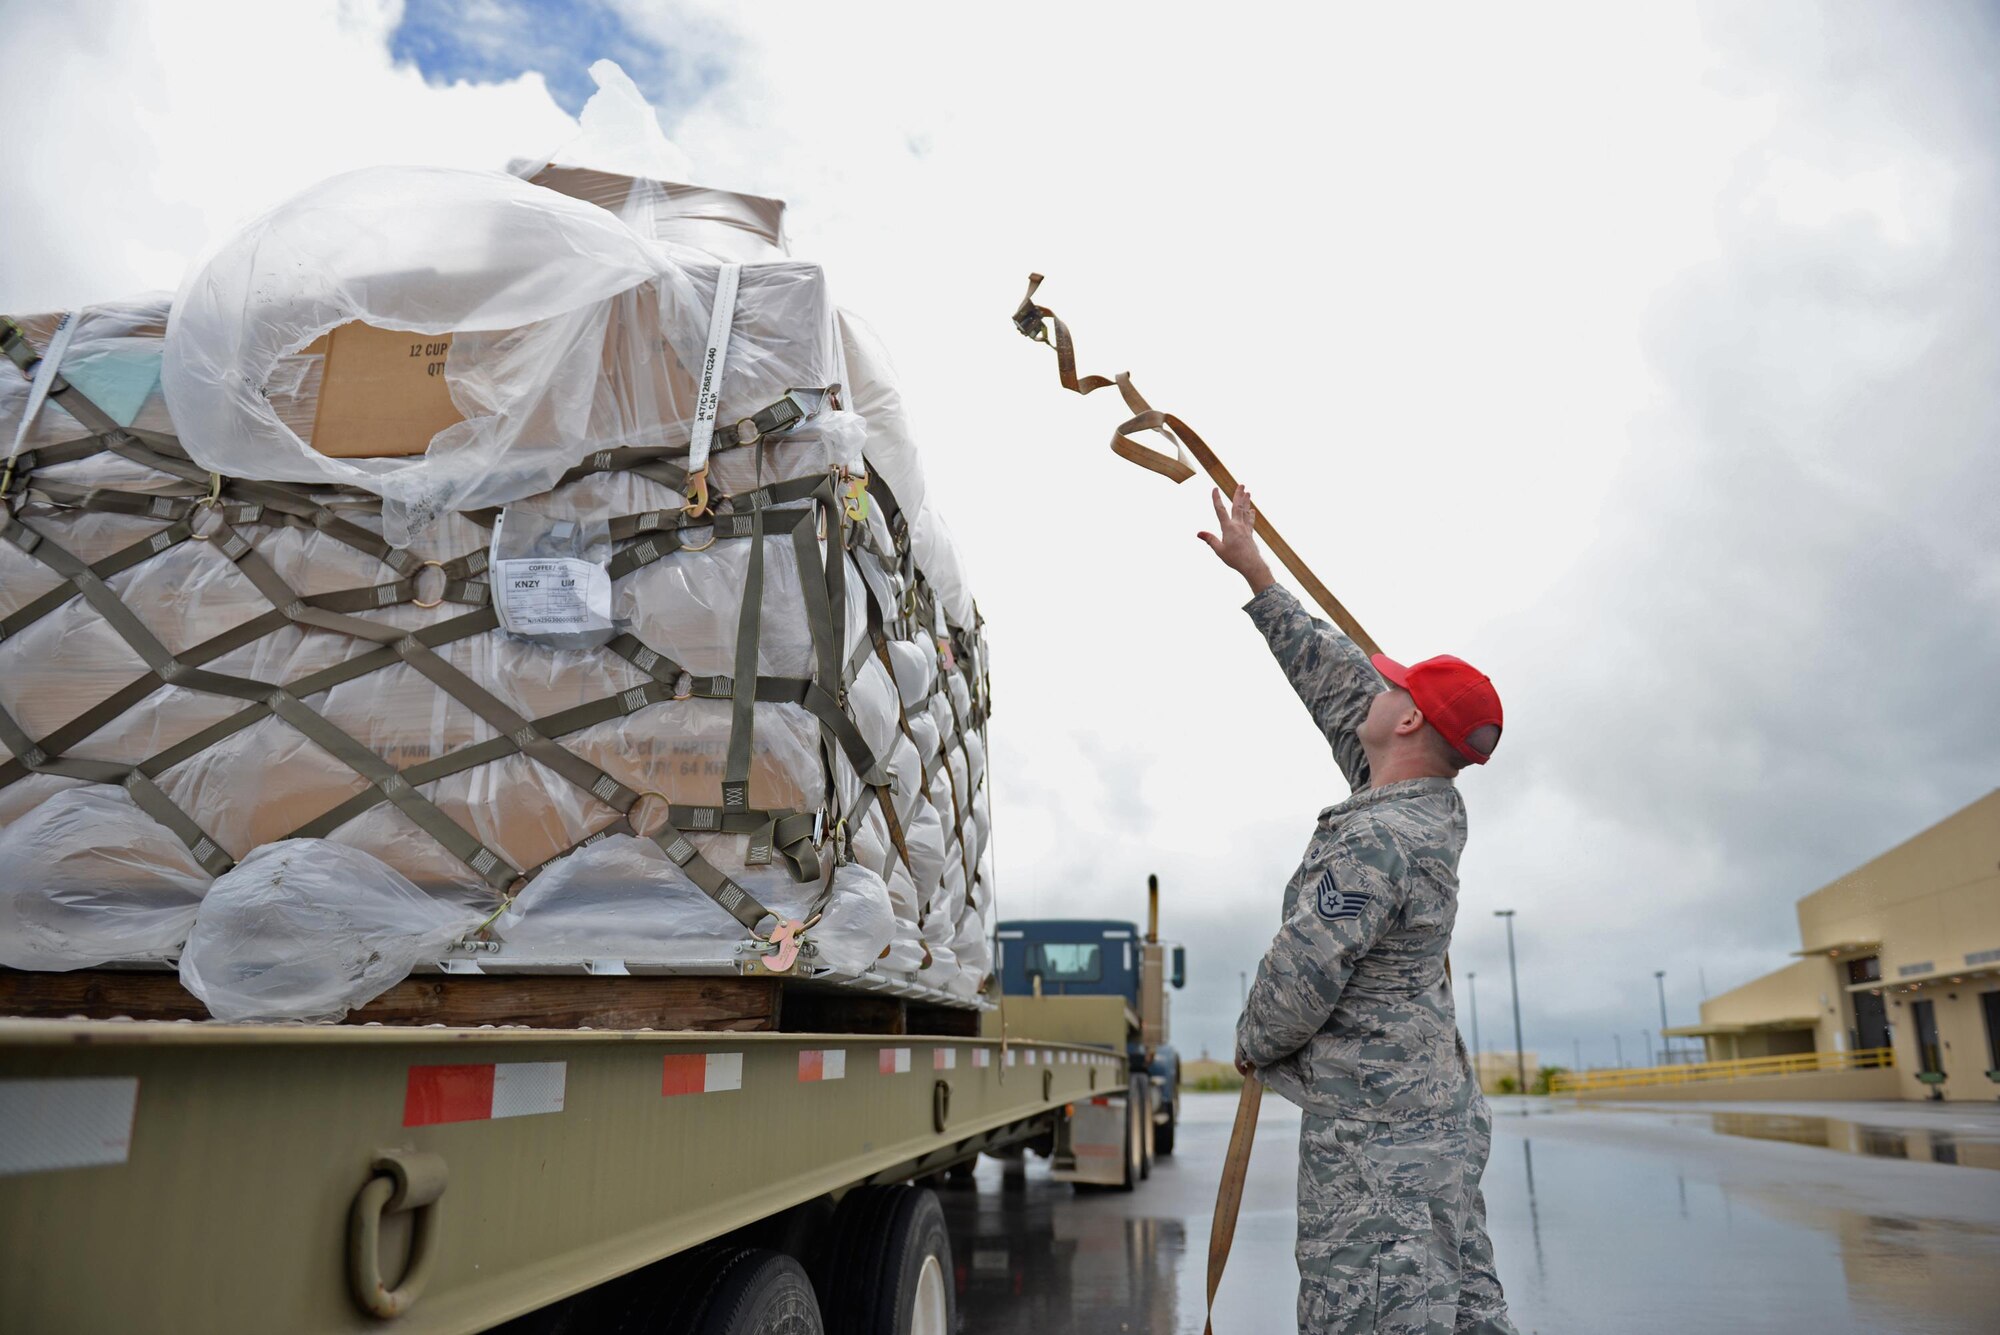 Staff Sgt. Andrew Welch, 554th RED HORSE Squadron construction equipment operator, secures a pallet of coffee to a flatbed truck August 18, 2016, at Andersen Air Force Base, Guam. The 554th RHS supports the 36th Wing Chapel by transporting and storing coffee after it arrives on base. (U.S. Air Force photo by Airman 1st Class Jacob Skovo)